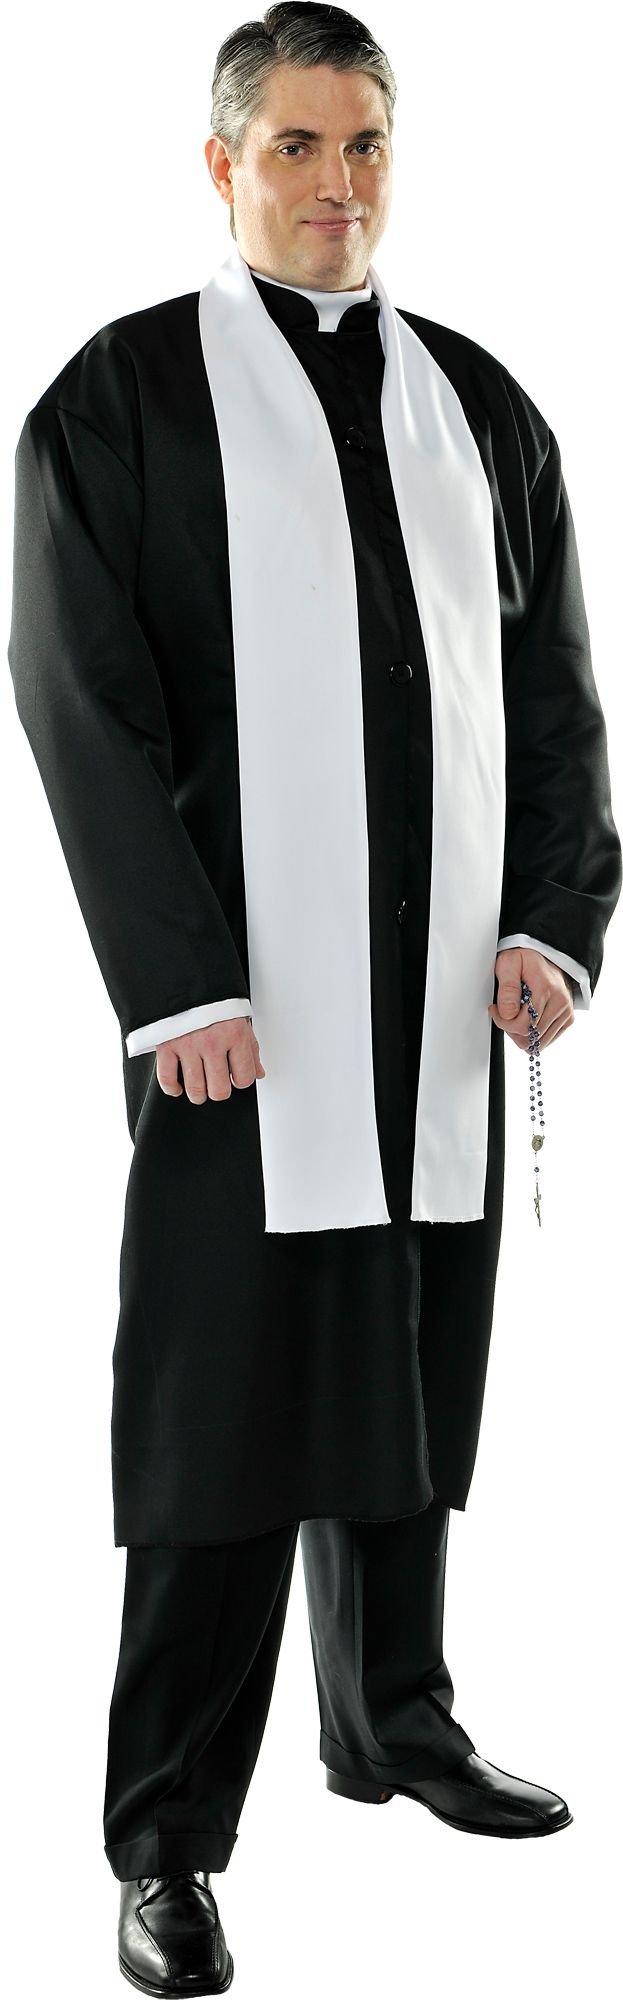 Adult Father Priest Costume Plus Size